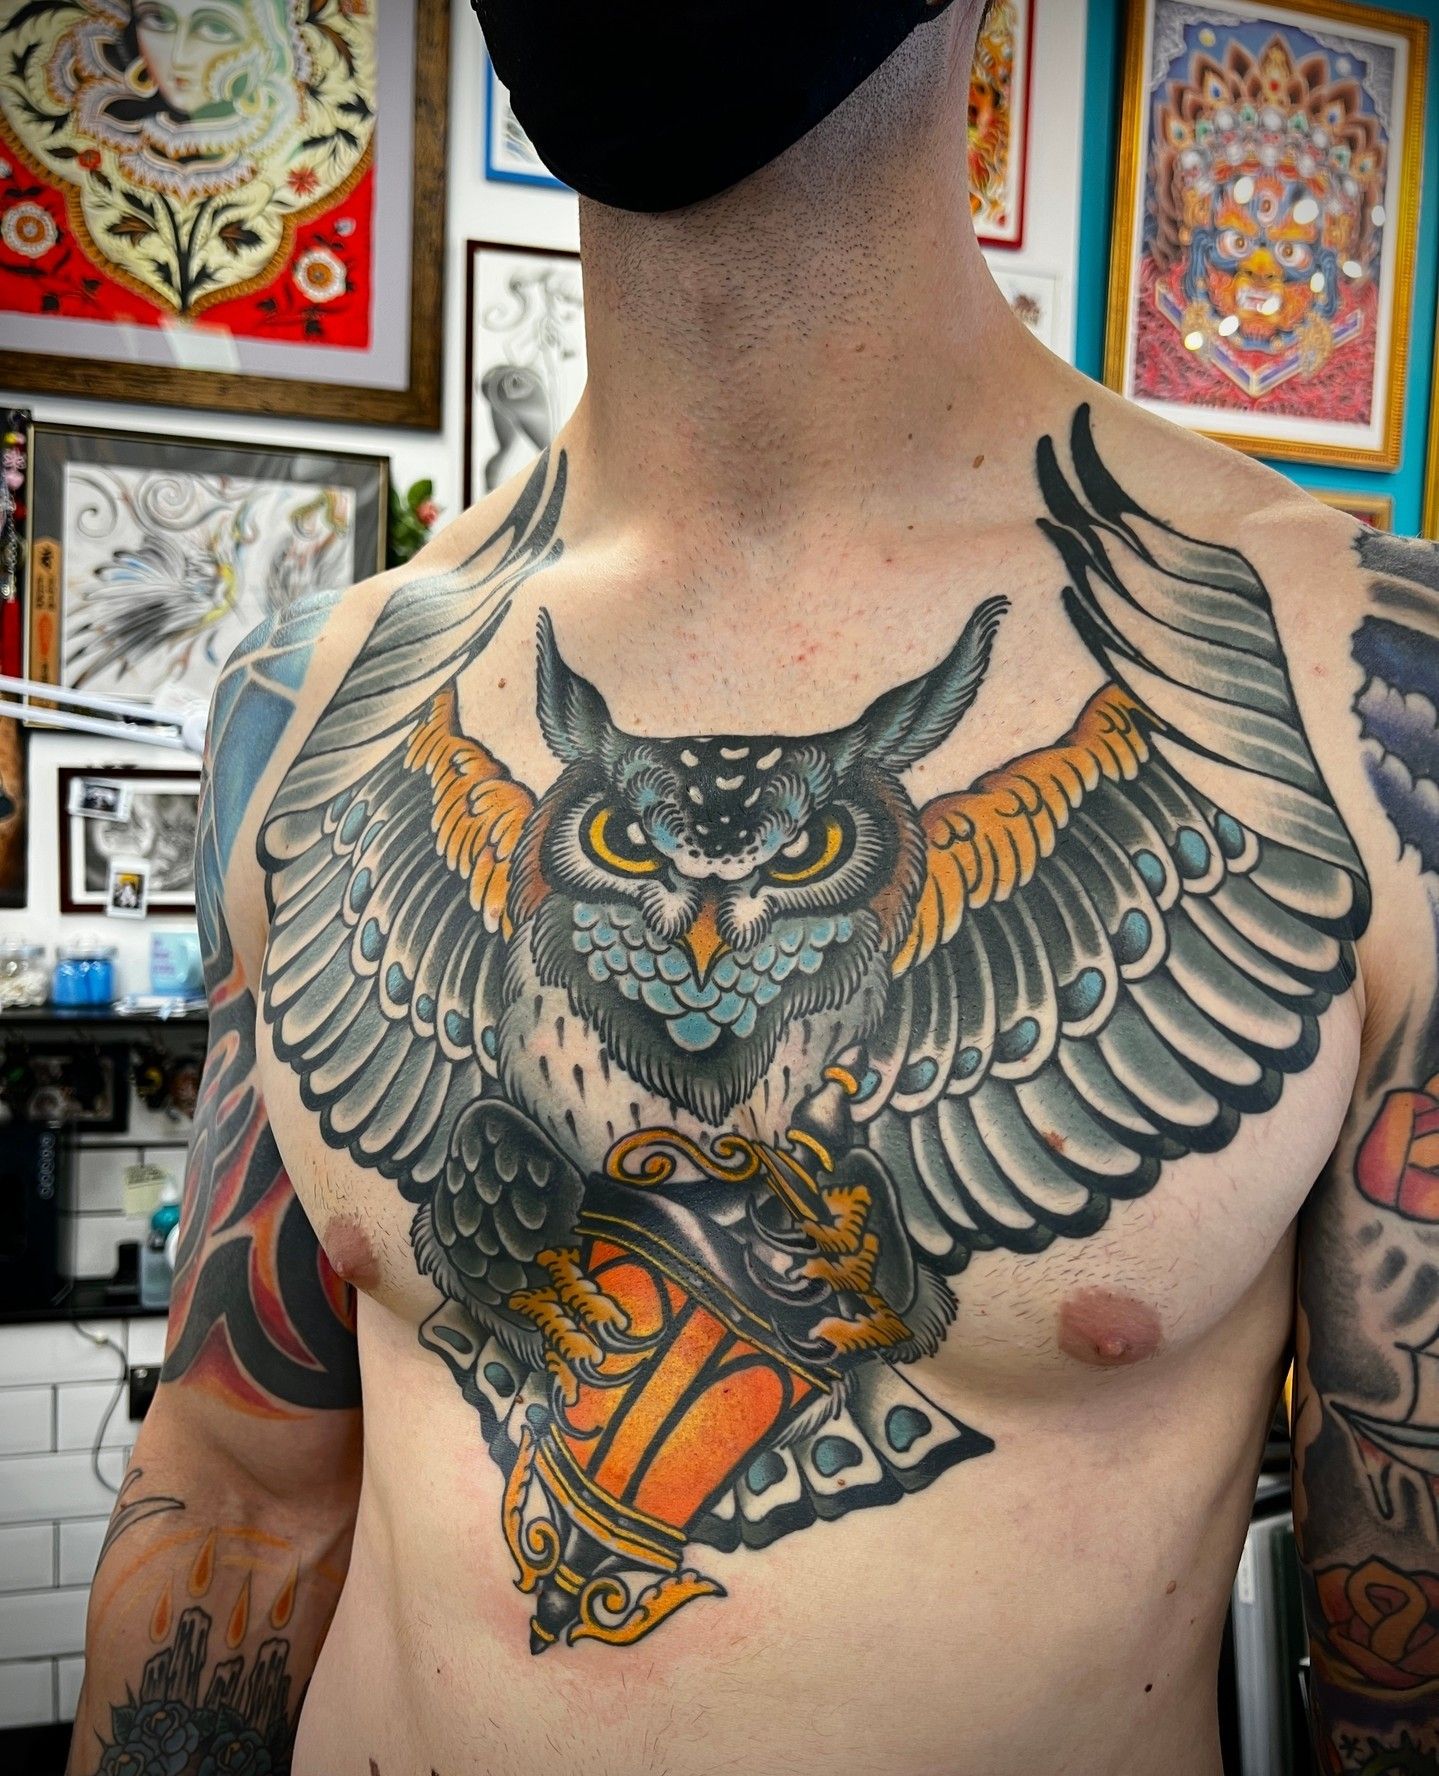 Inkmaniak tattoos - Recently finished this massive traditional owl chest  piece! enjoyed doing it and pretty stoked with the outcome | Facebook